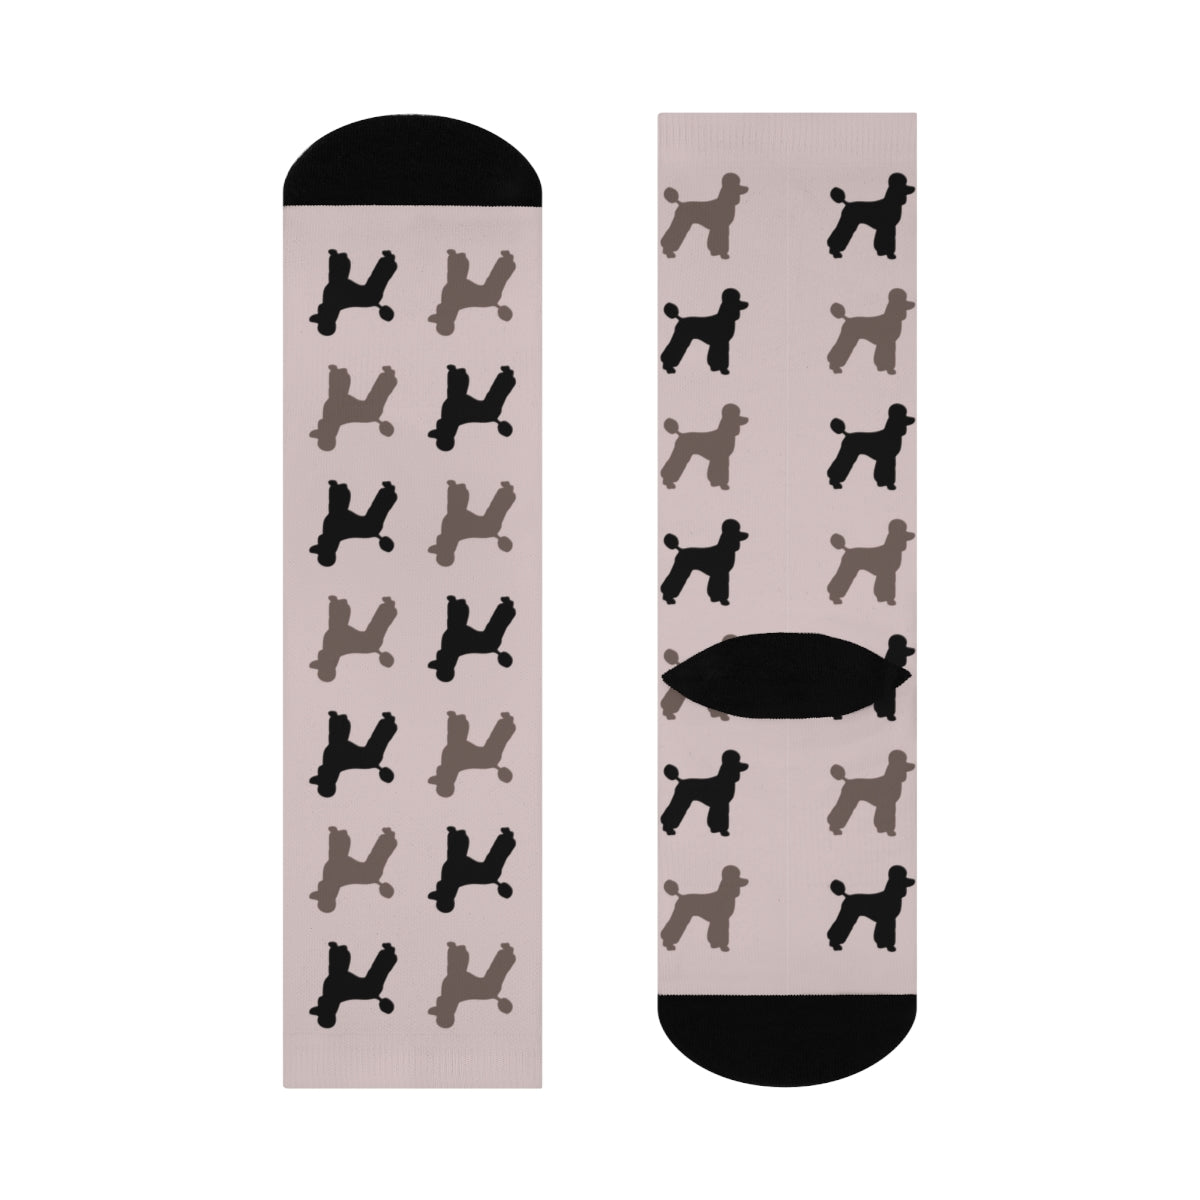 Poodle Crew Socks! 50's Style, great gift! classic, preppy design Standard Poodle - The Dapper Dogg